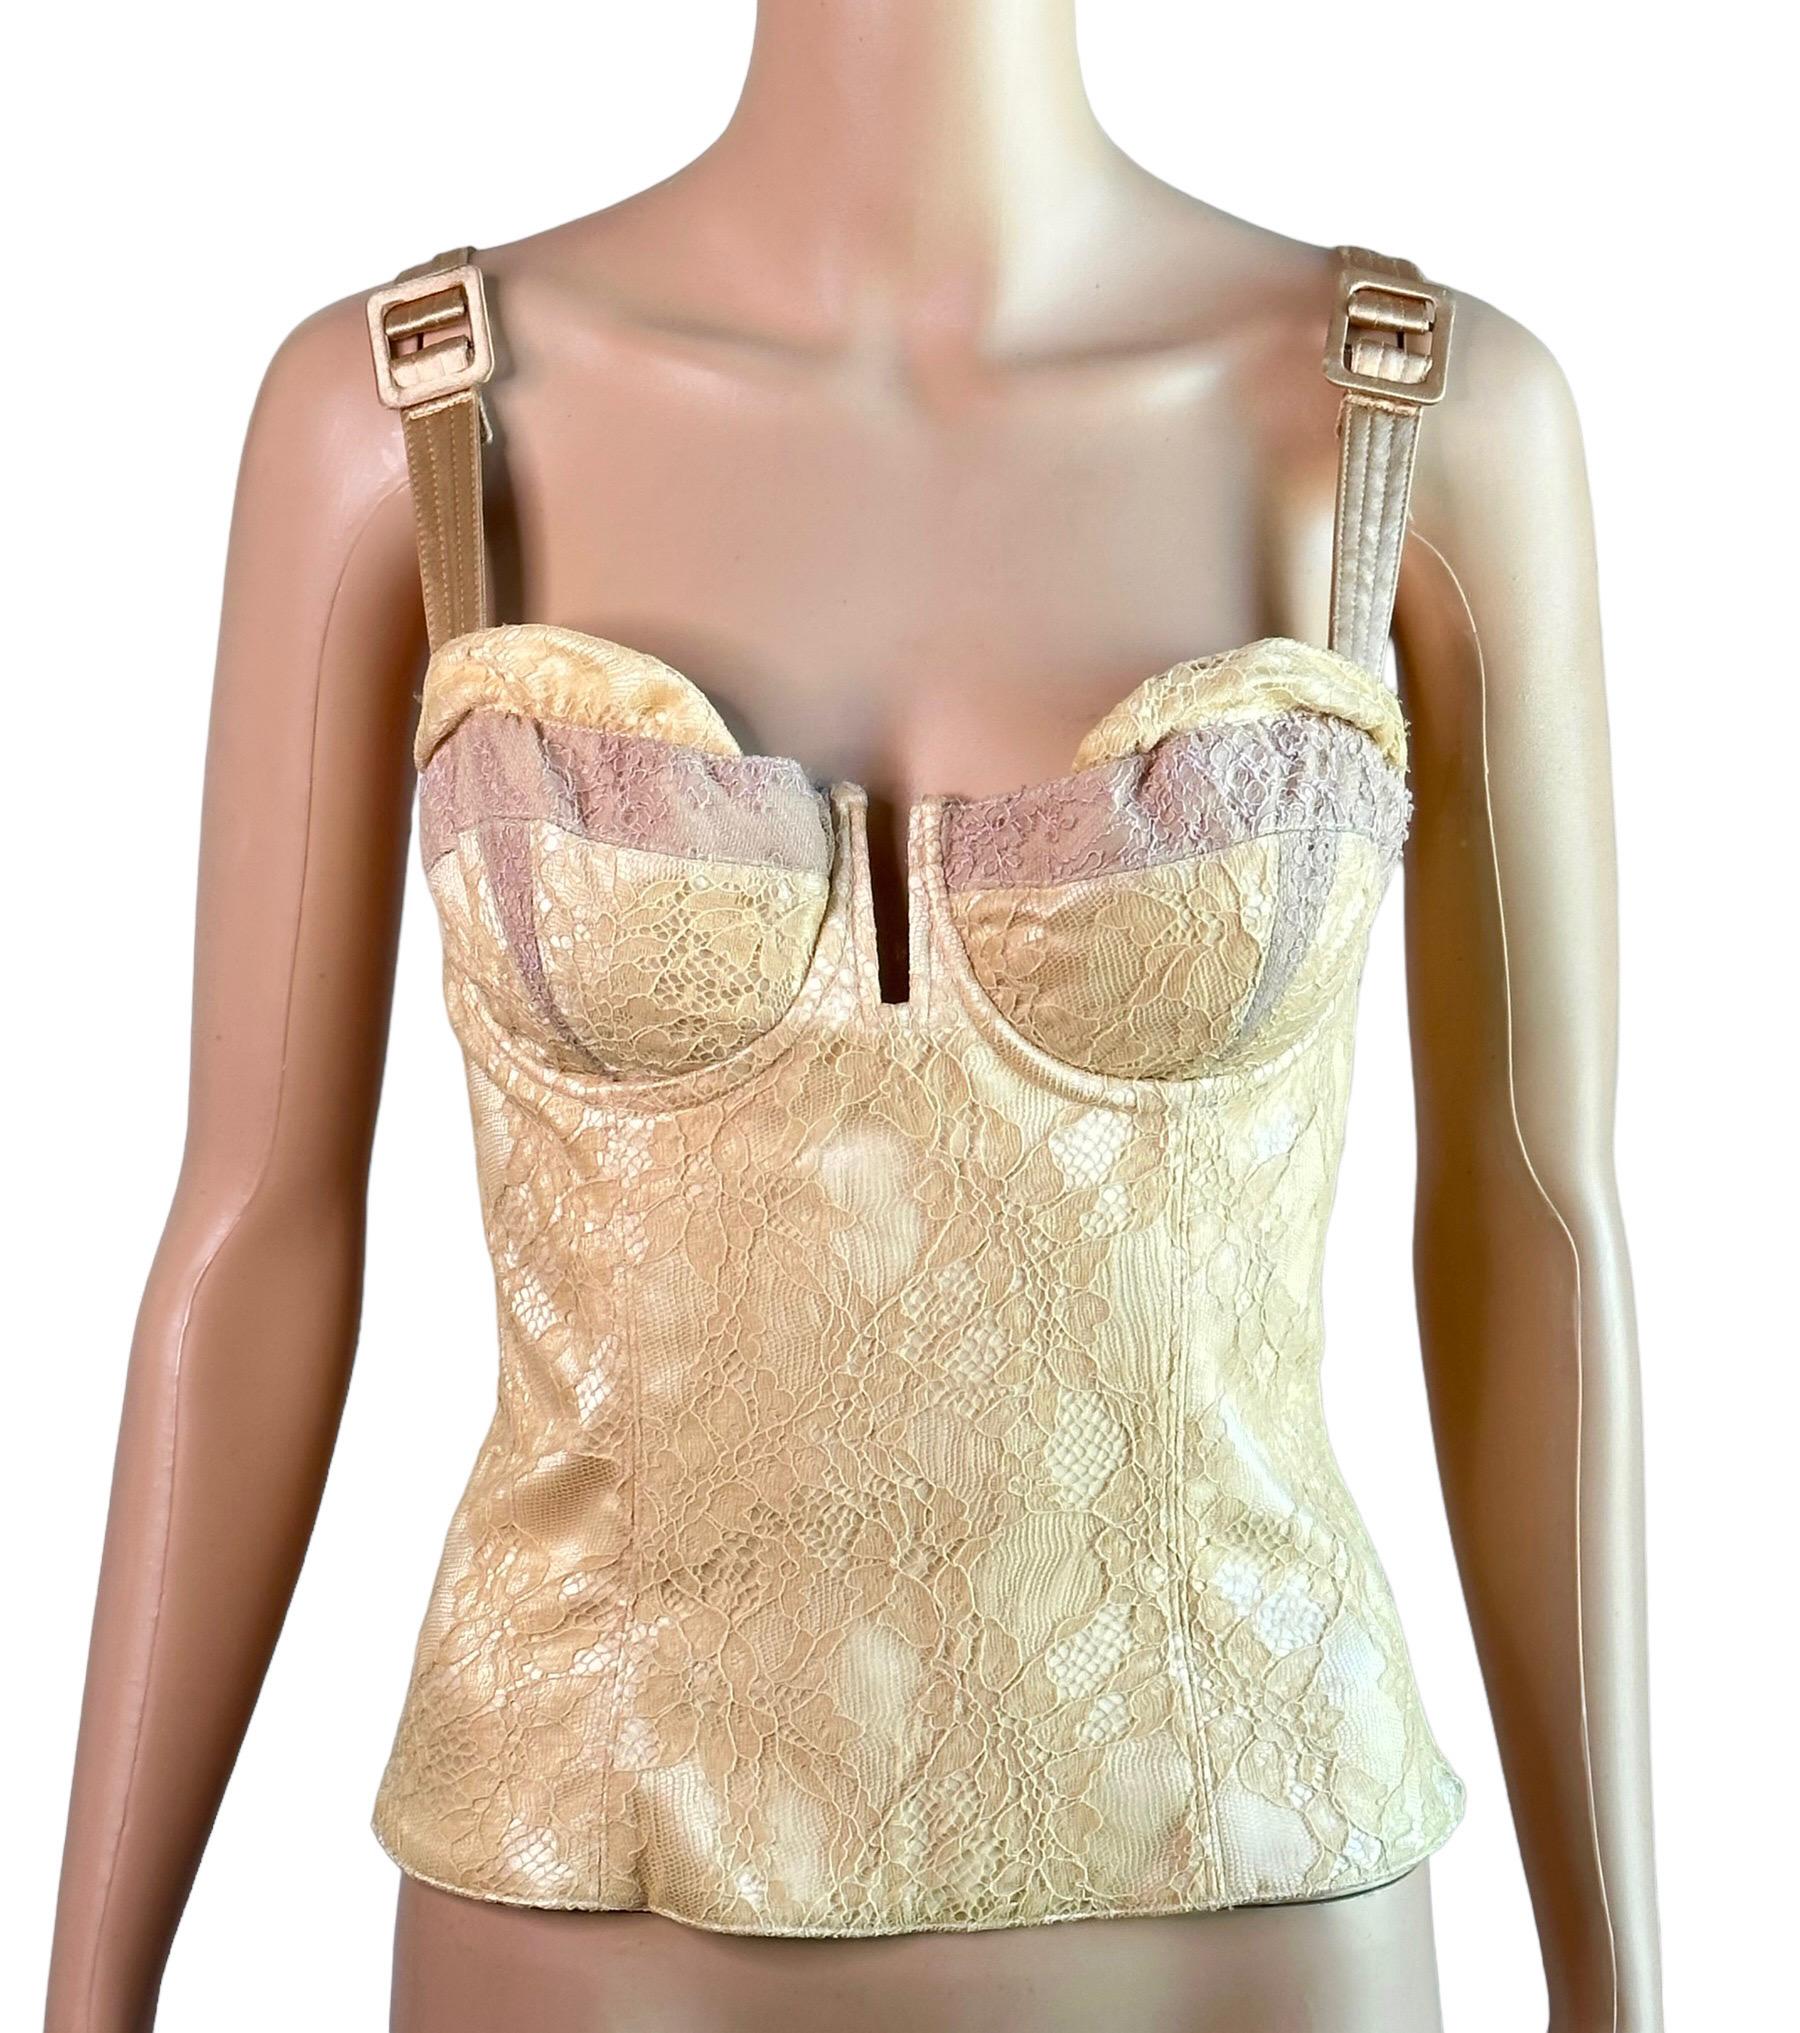 Christian Dior By John Galliano S/S 2004 Runway Bustier Lace Corset Crop Top For Sale 2